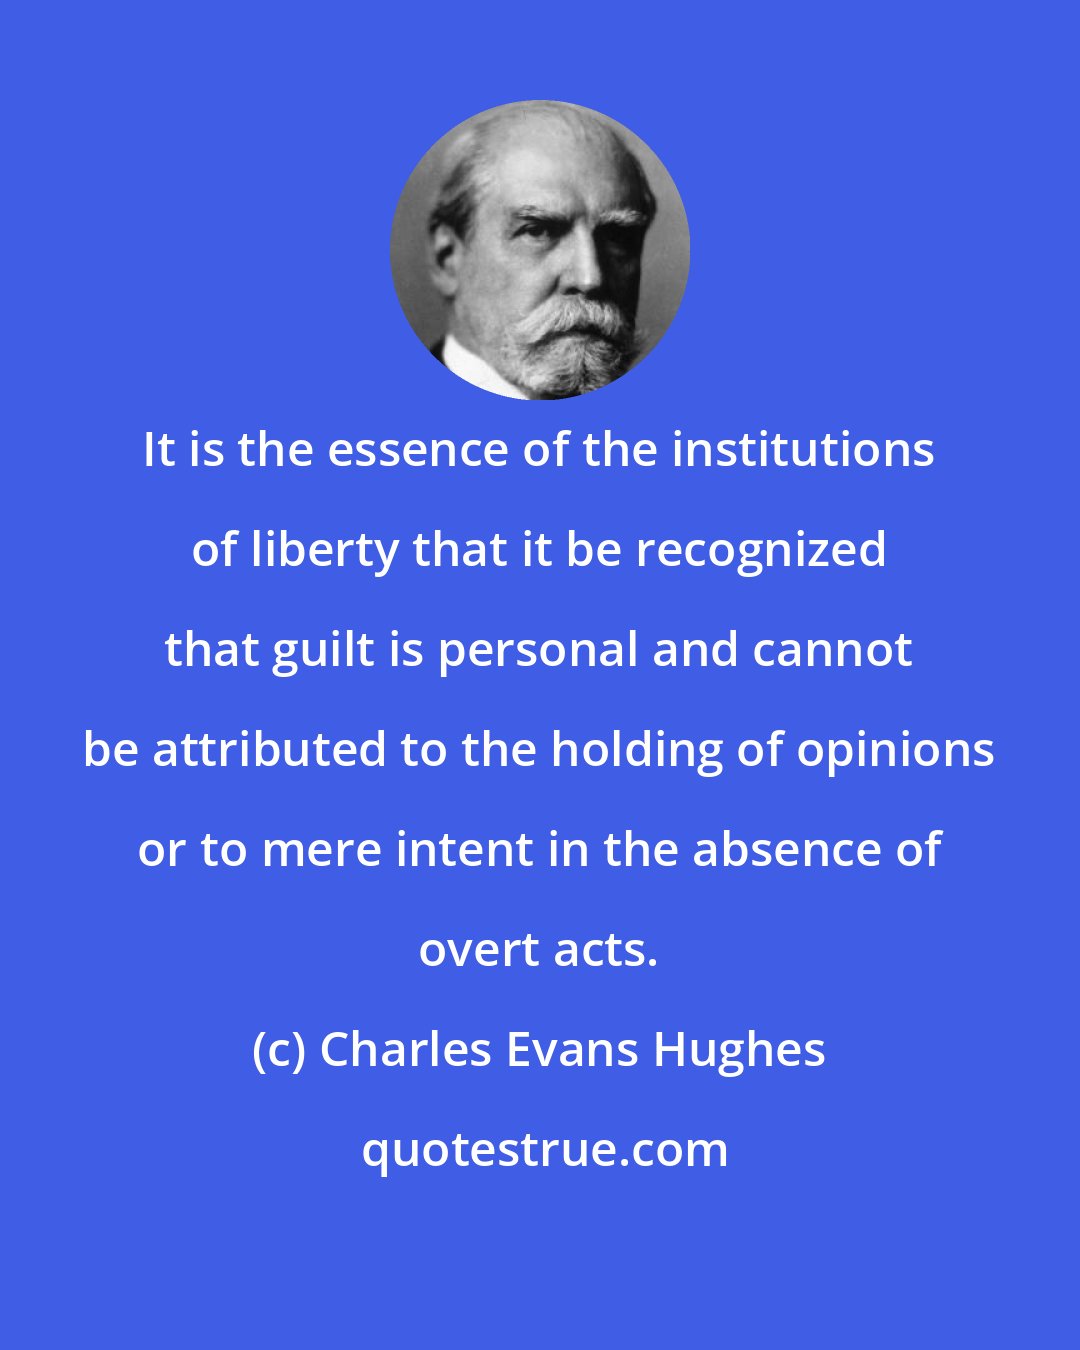 Charles Evans Hughes: It is the essence of the institutions of liberty that it be recognized that guilt is personal and cannot be attributed to the holding of opinions or to mere intent in the absence of overt acts.